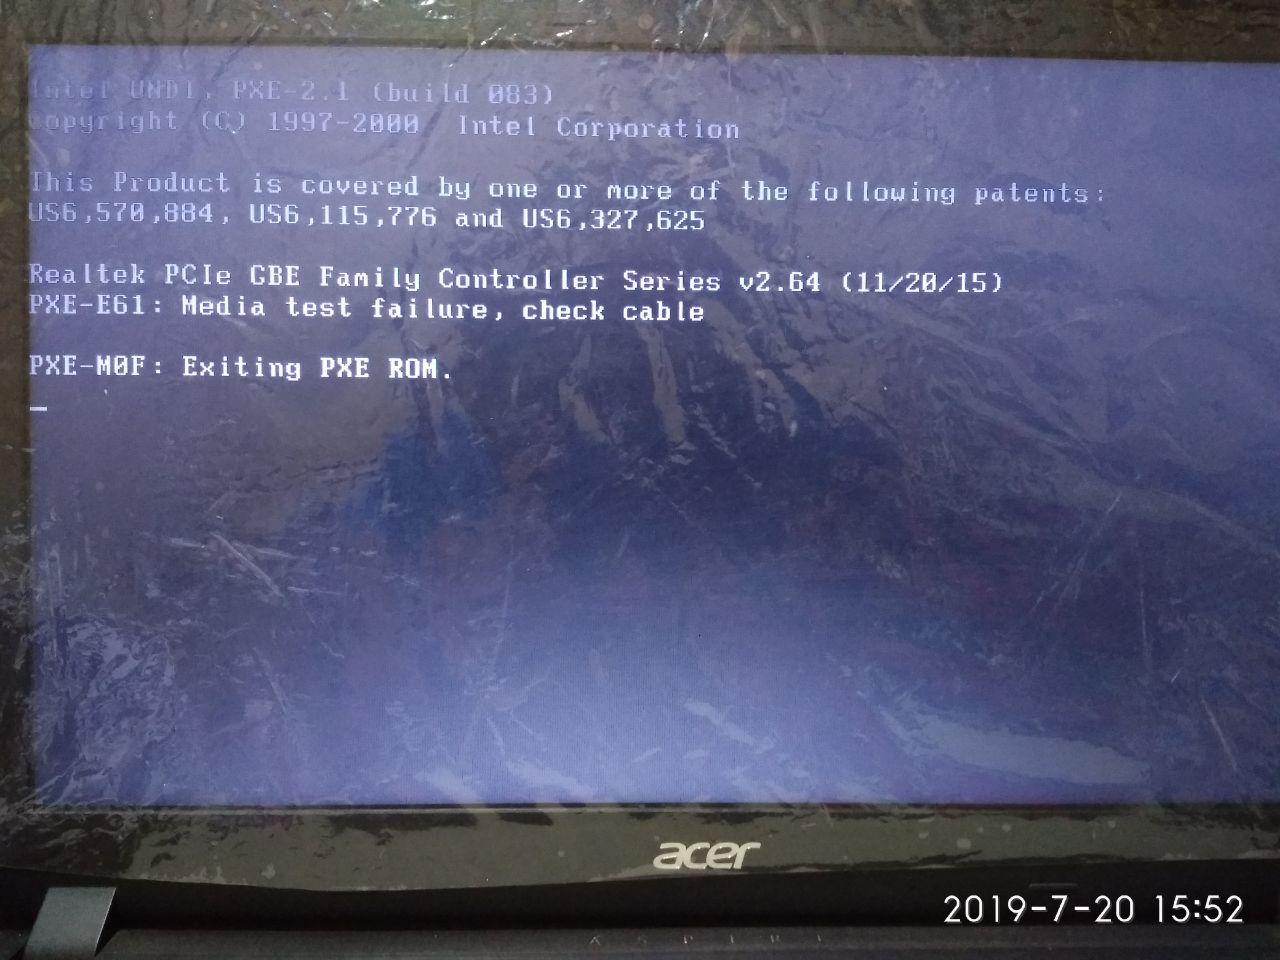 PXE E61 MEDIA TEST FAILURE CHECK CABLE , PXE MOF EXISTING PXE ROM